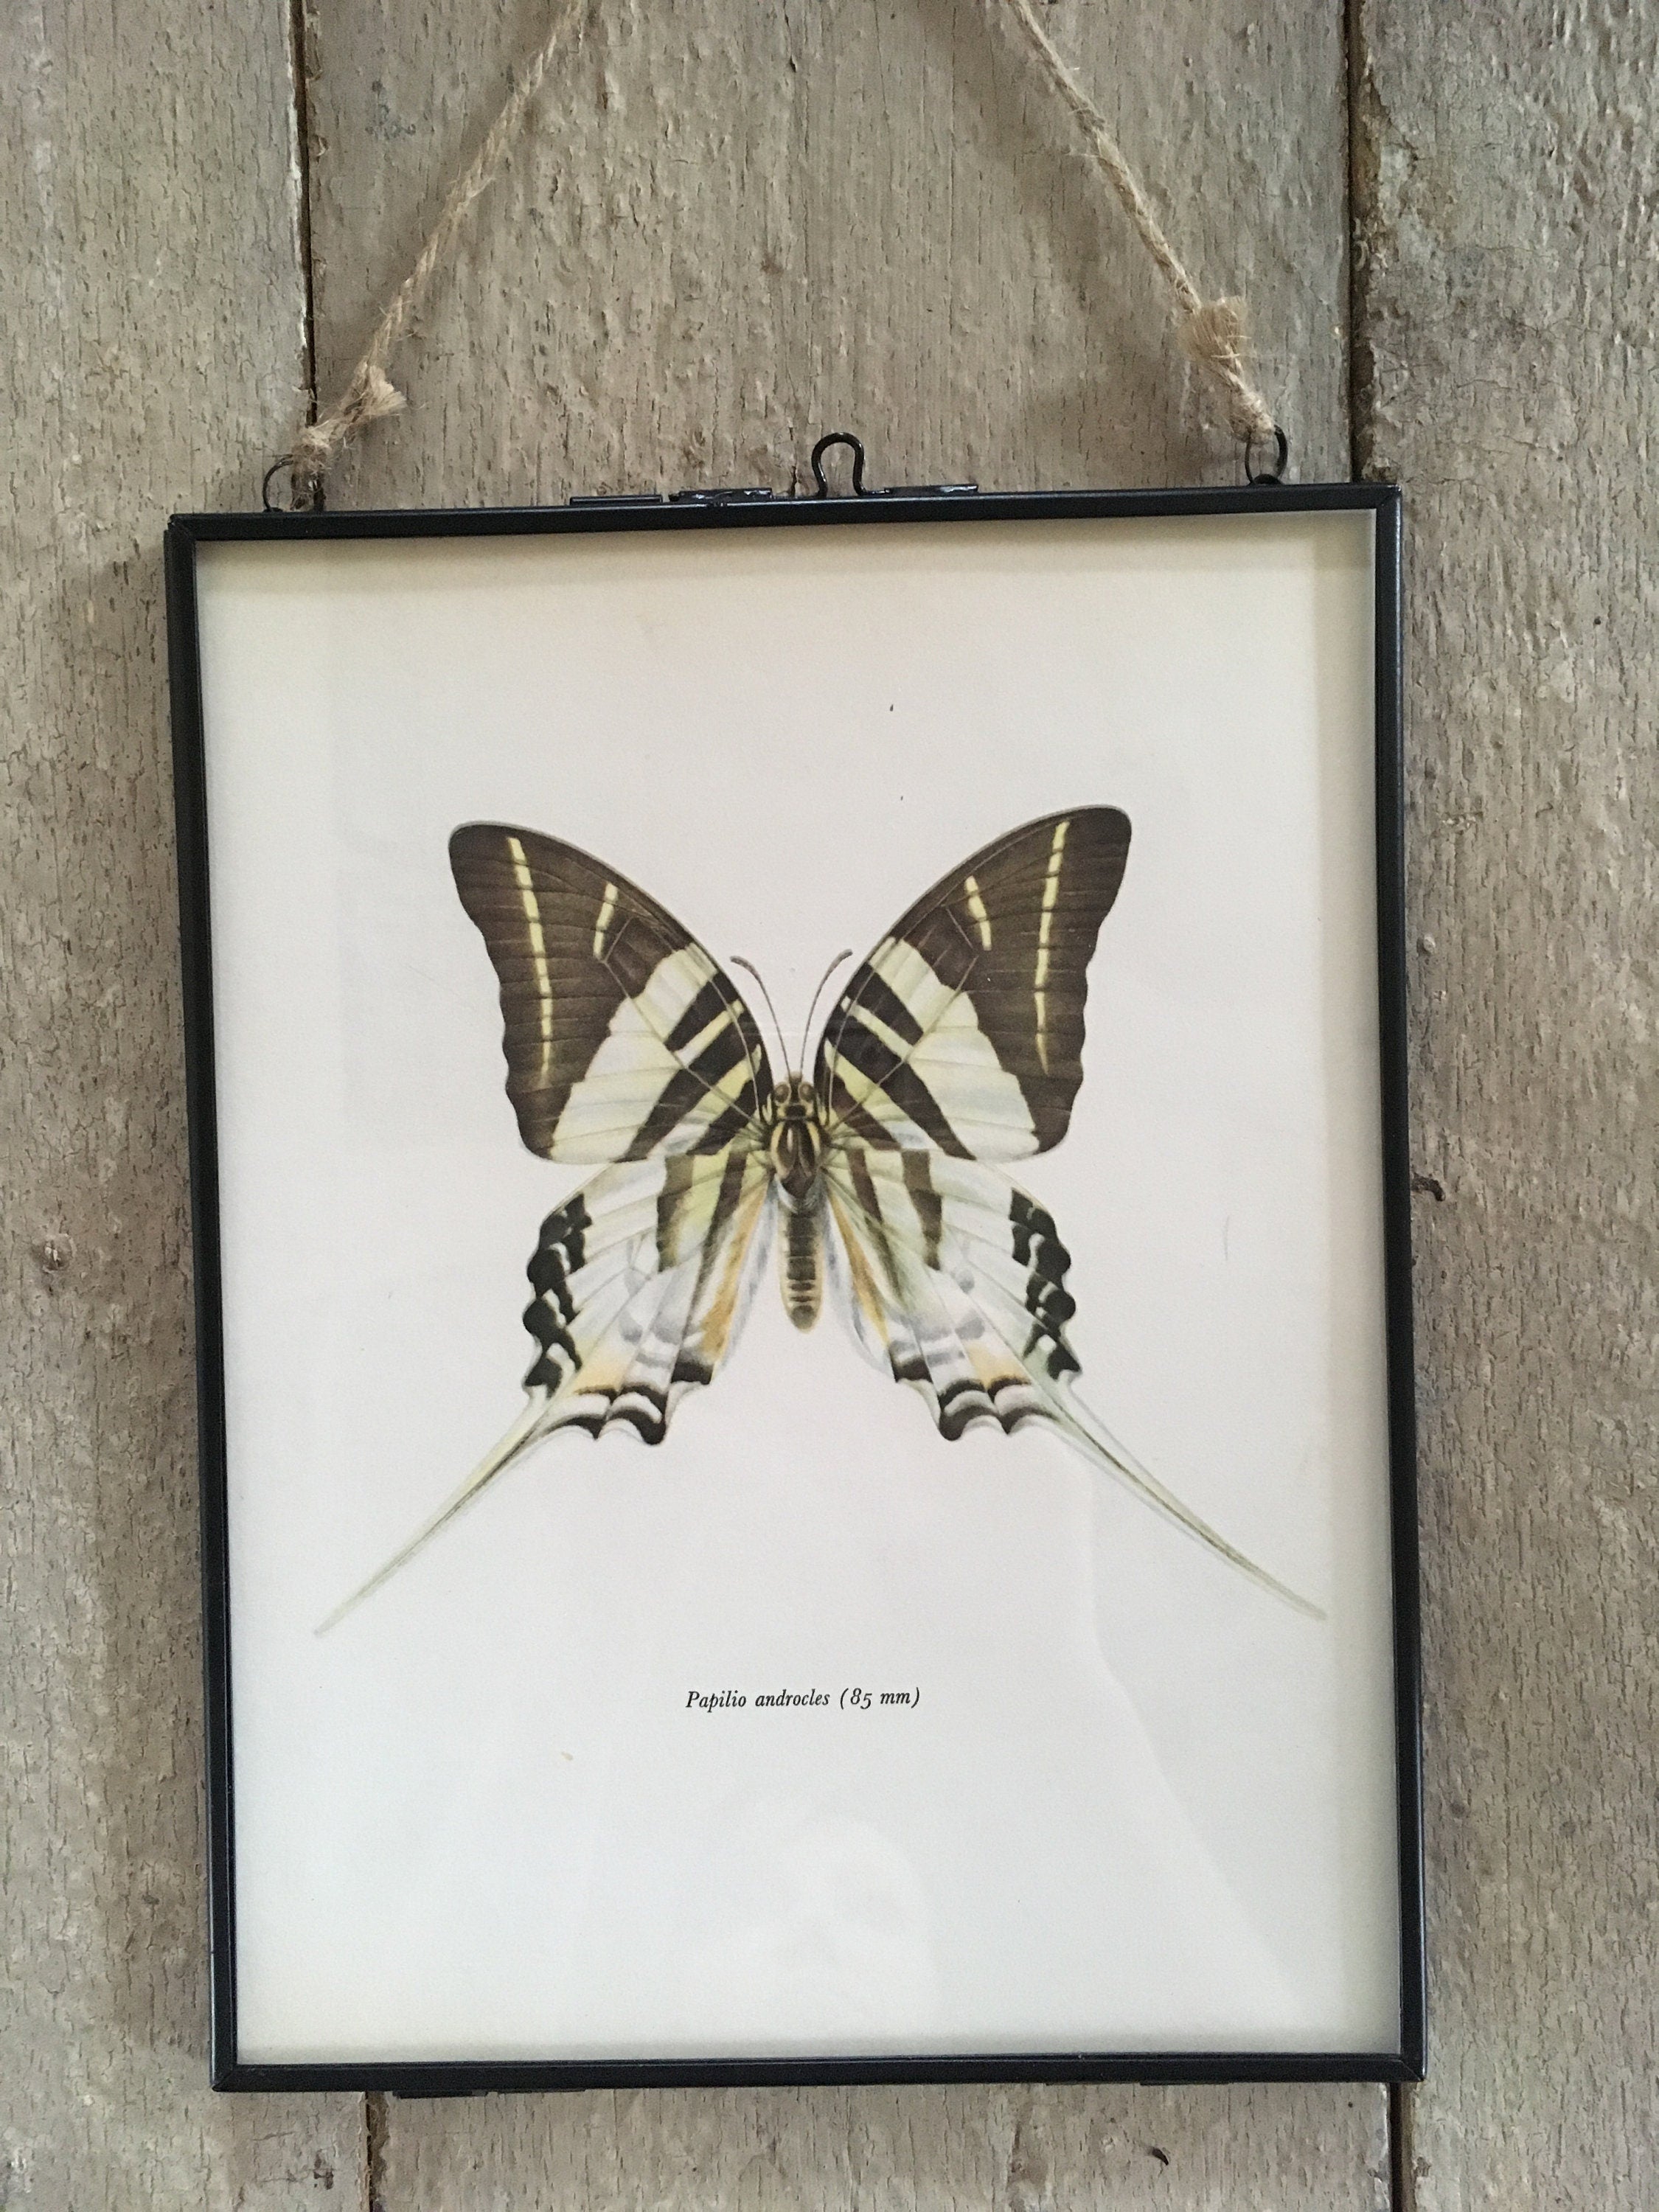 Framed Original Vintage Black, White Butterfly Book Plate, Old Book Print, Insect Art, Monochrome, Hanging Wall Art, Sustainable Art